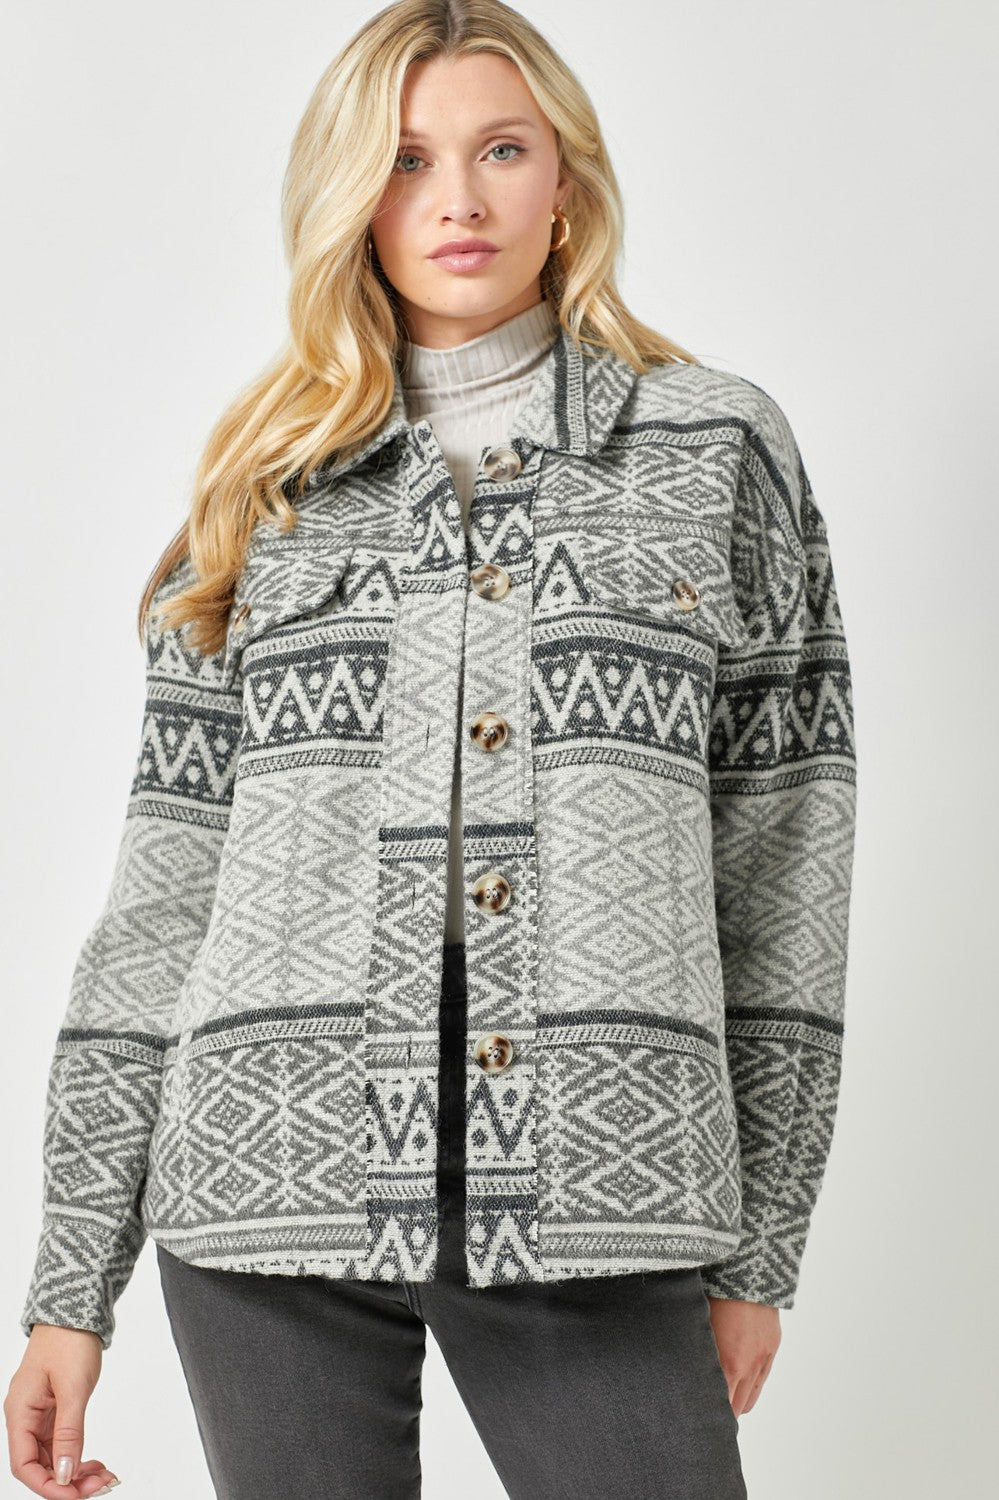 CHARCOAL GREY AZTEC BUTTON UP JACKET